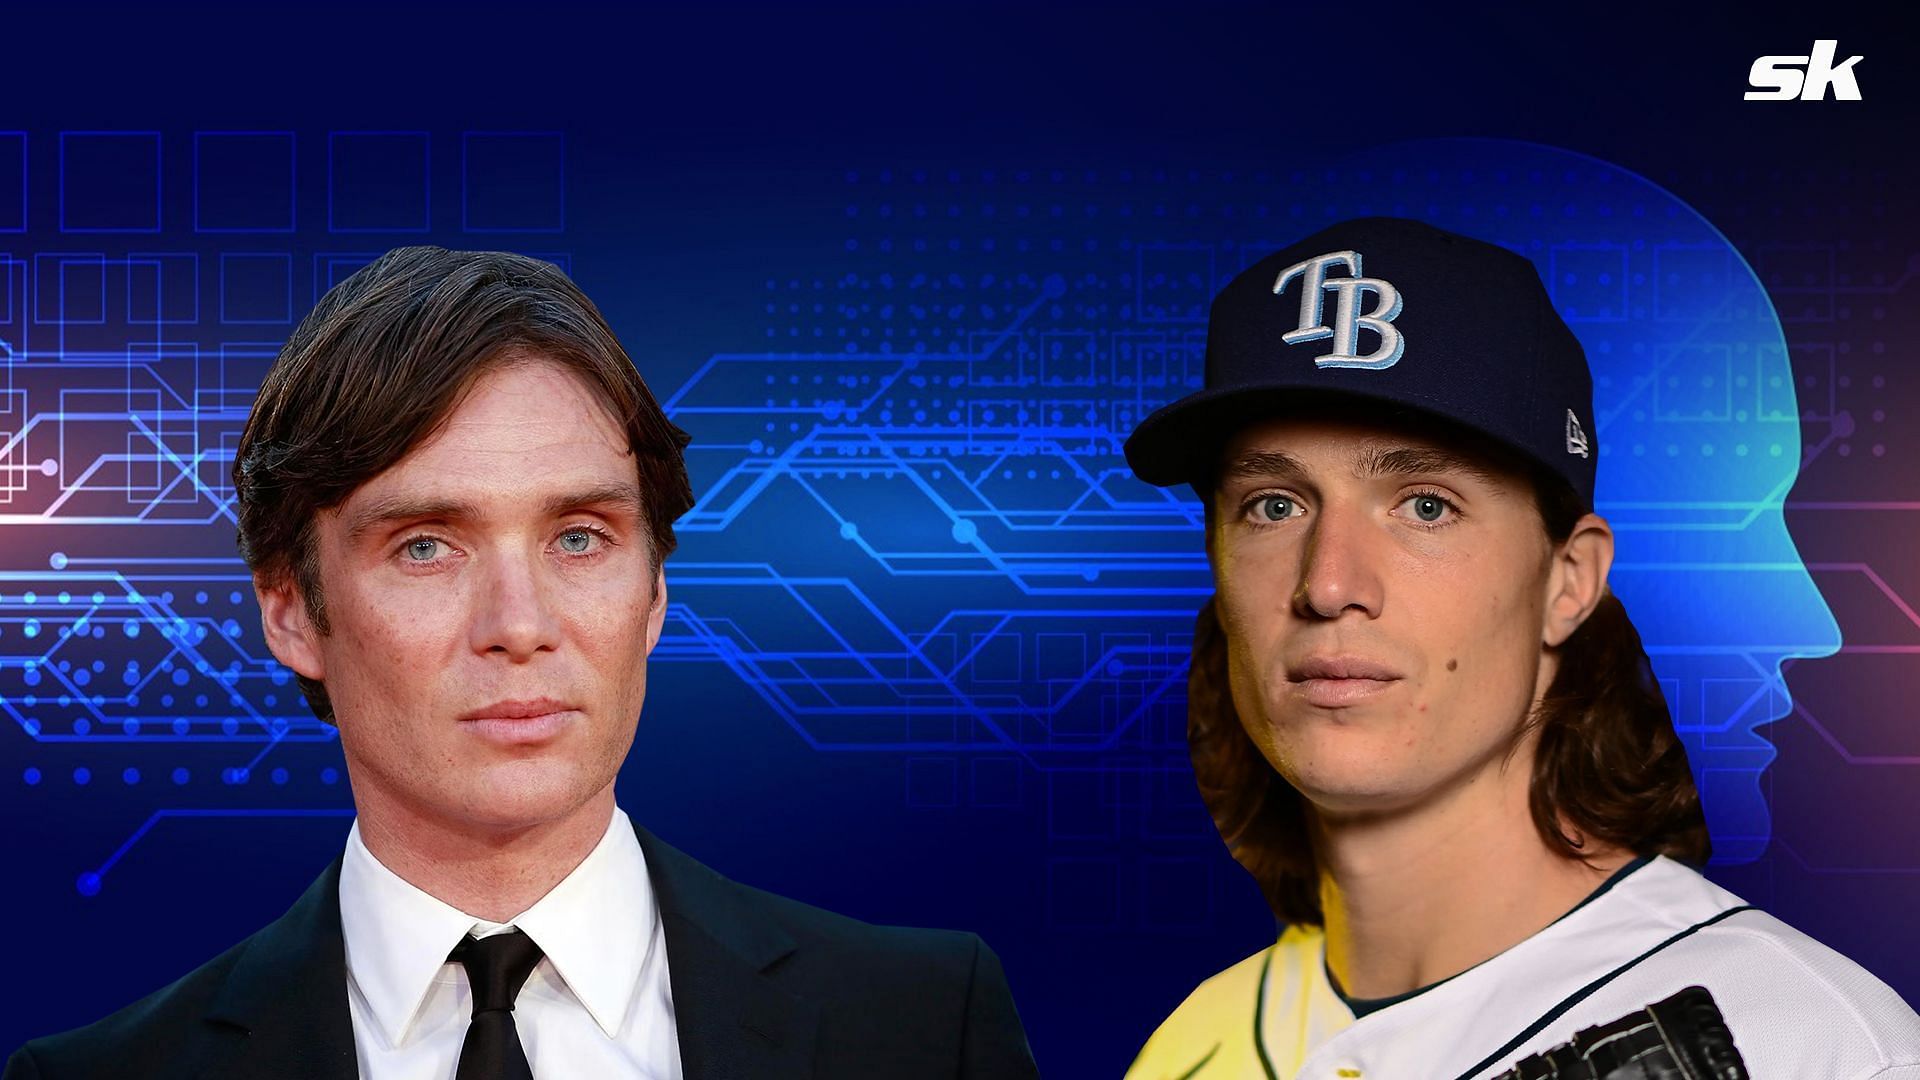 Everyone talks about Tyler Glasnow and Cillian Murphy, but what